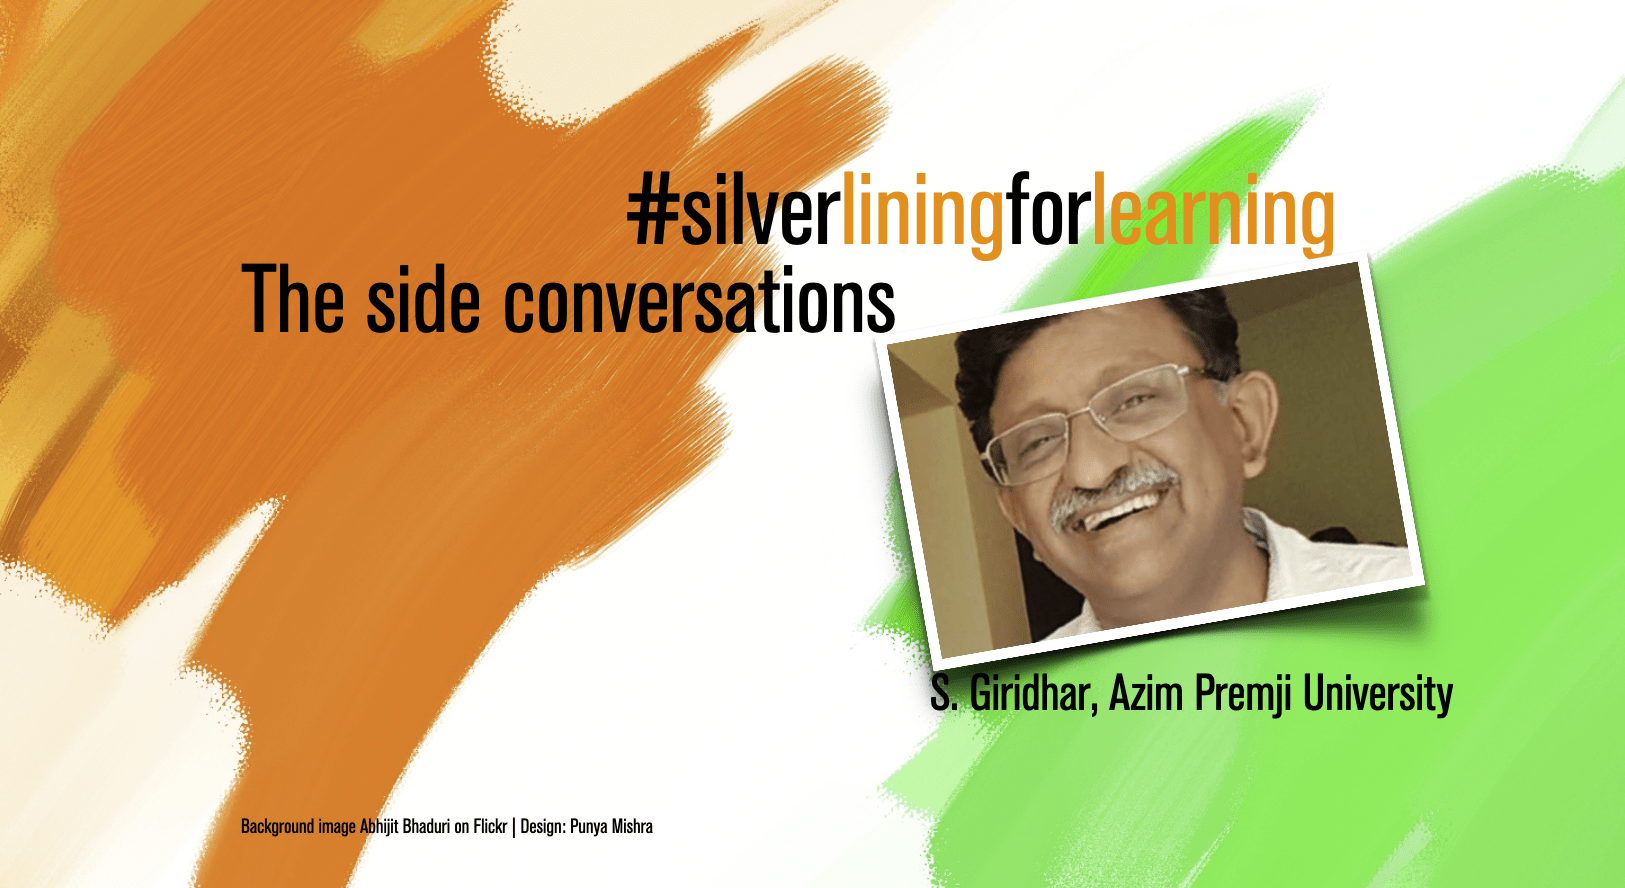 A Silver Lining side conversation with S. Giridhar: